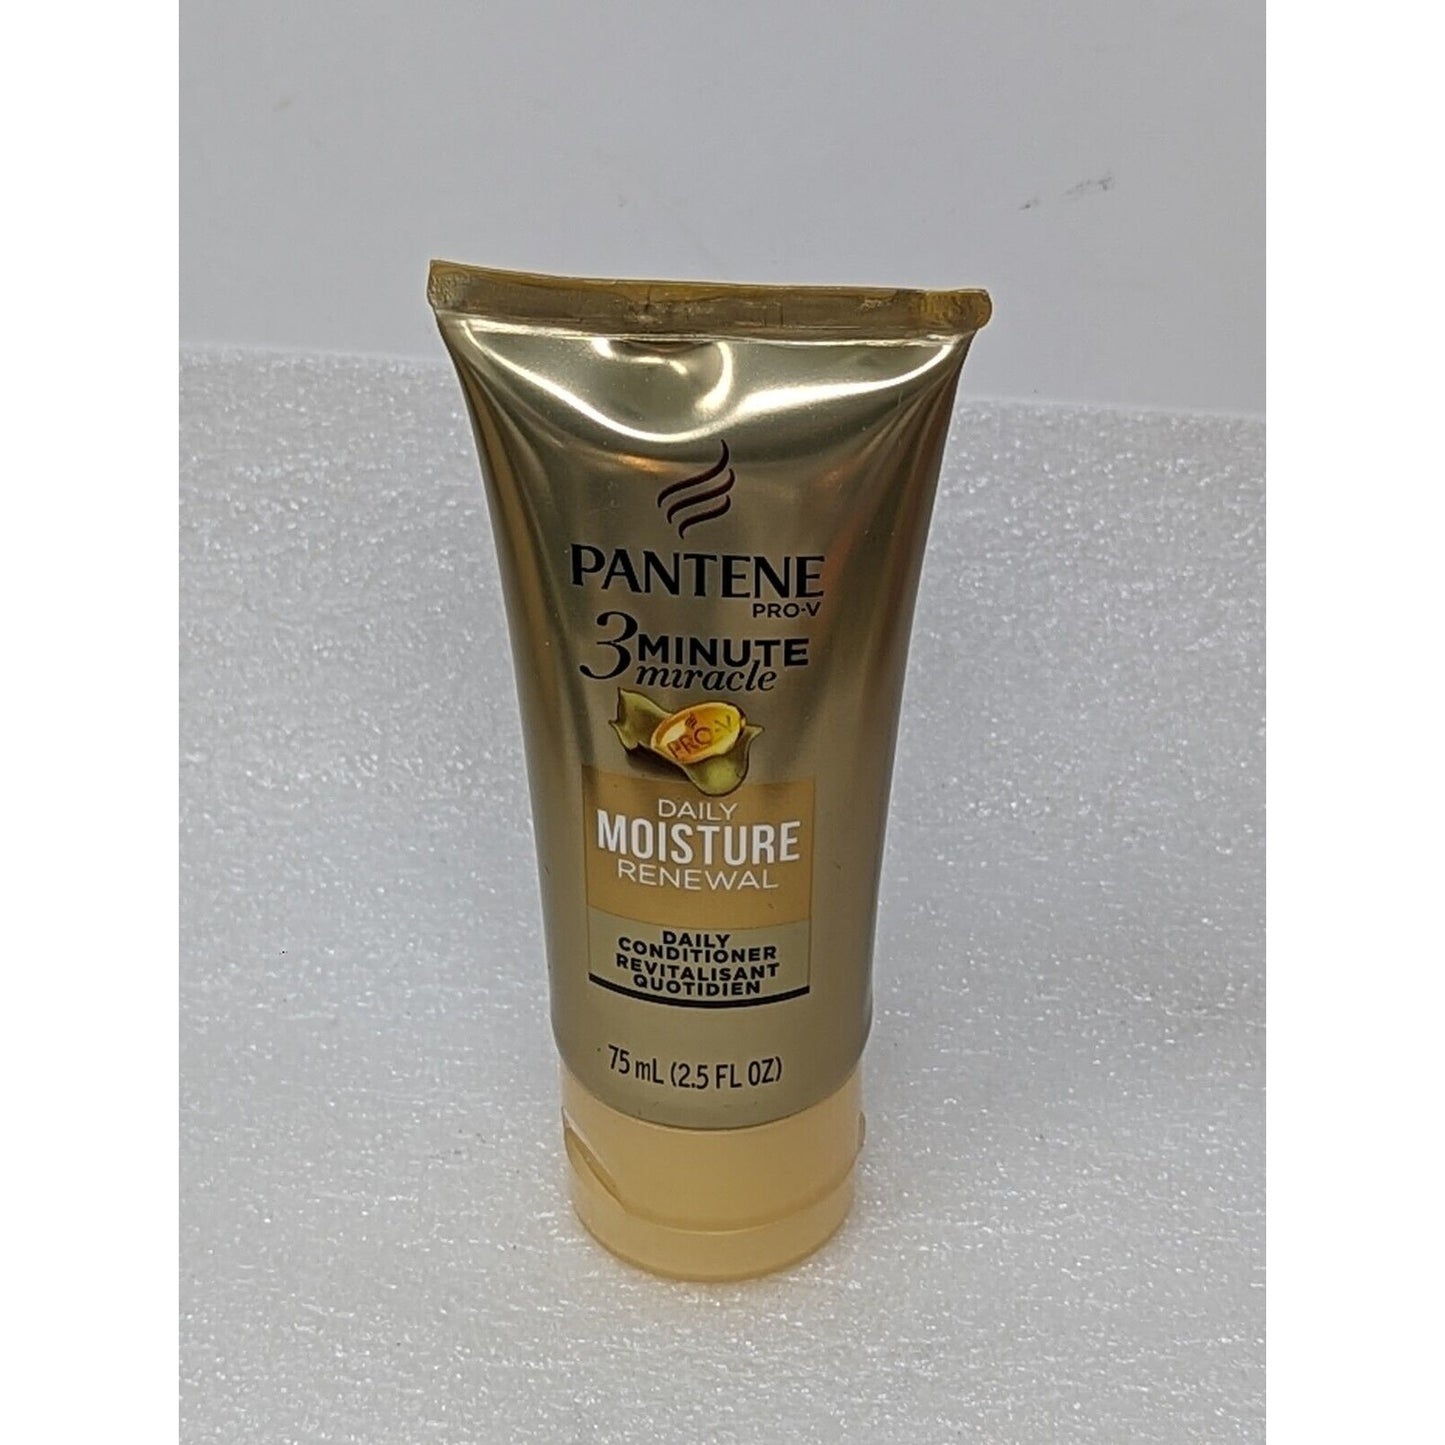 Pantene Pro-V Daily Conditioner 3 Minute Miracle Moisture Renewal 2.5 oz